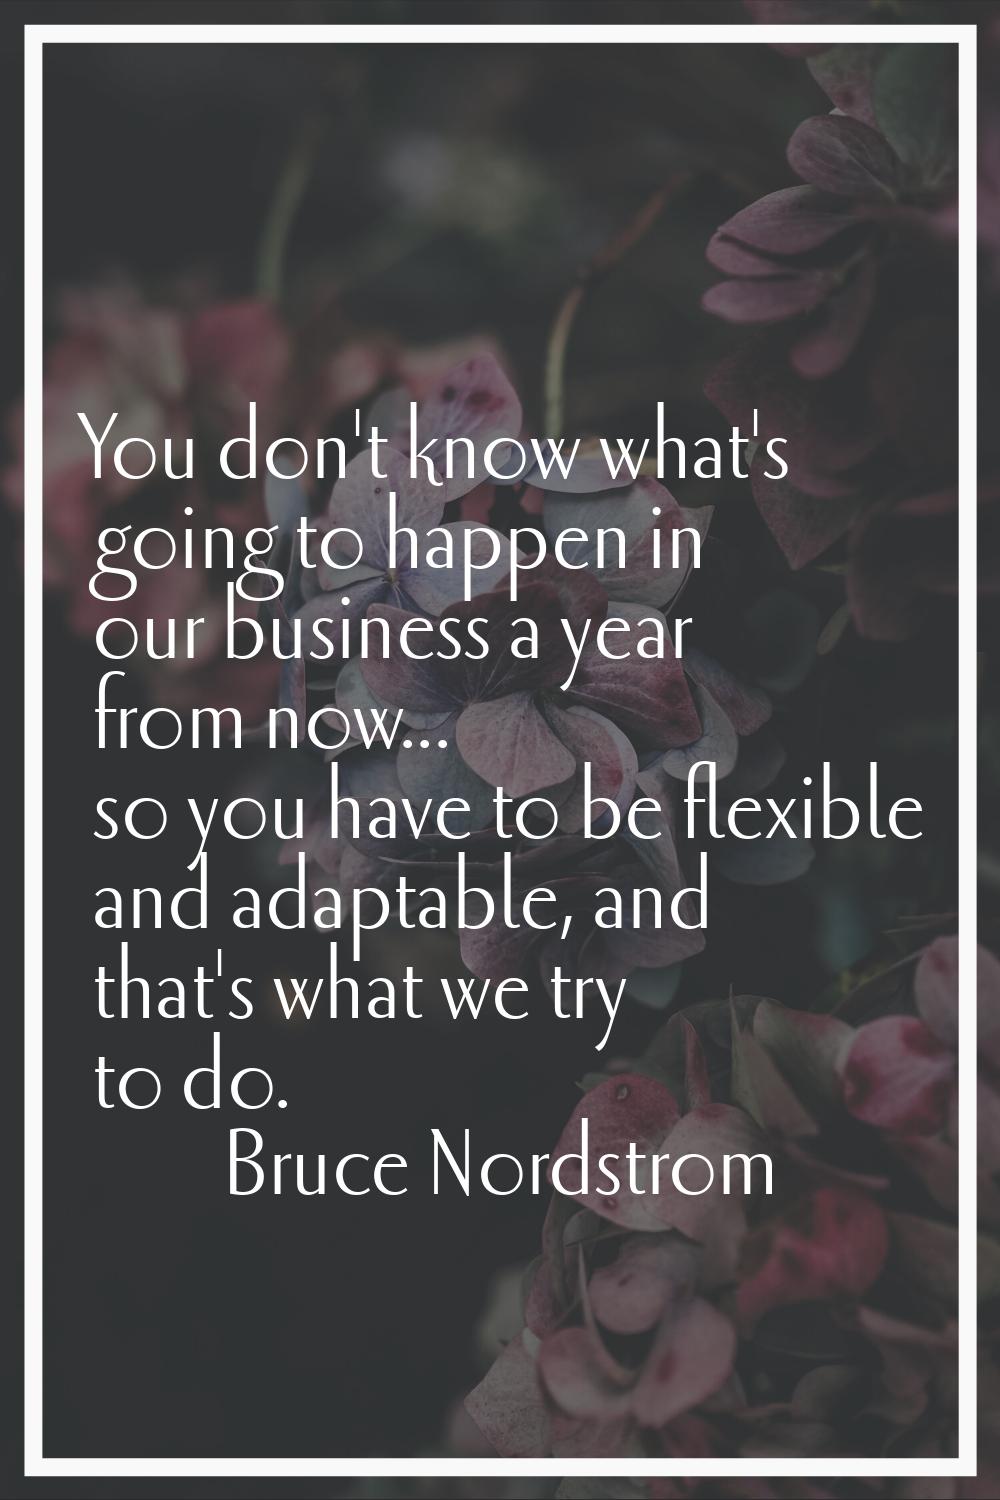 You don't know what's going to happen in our business a year from now... so you have to be flexible